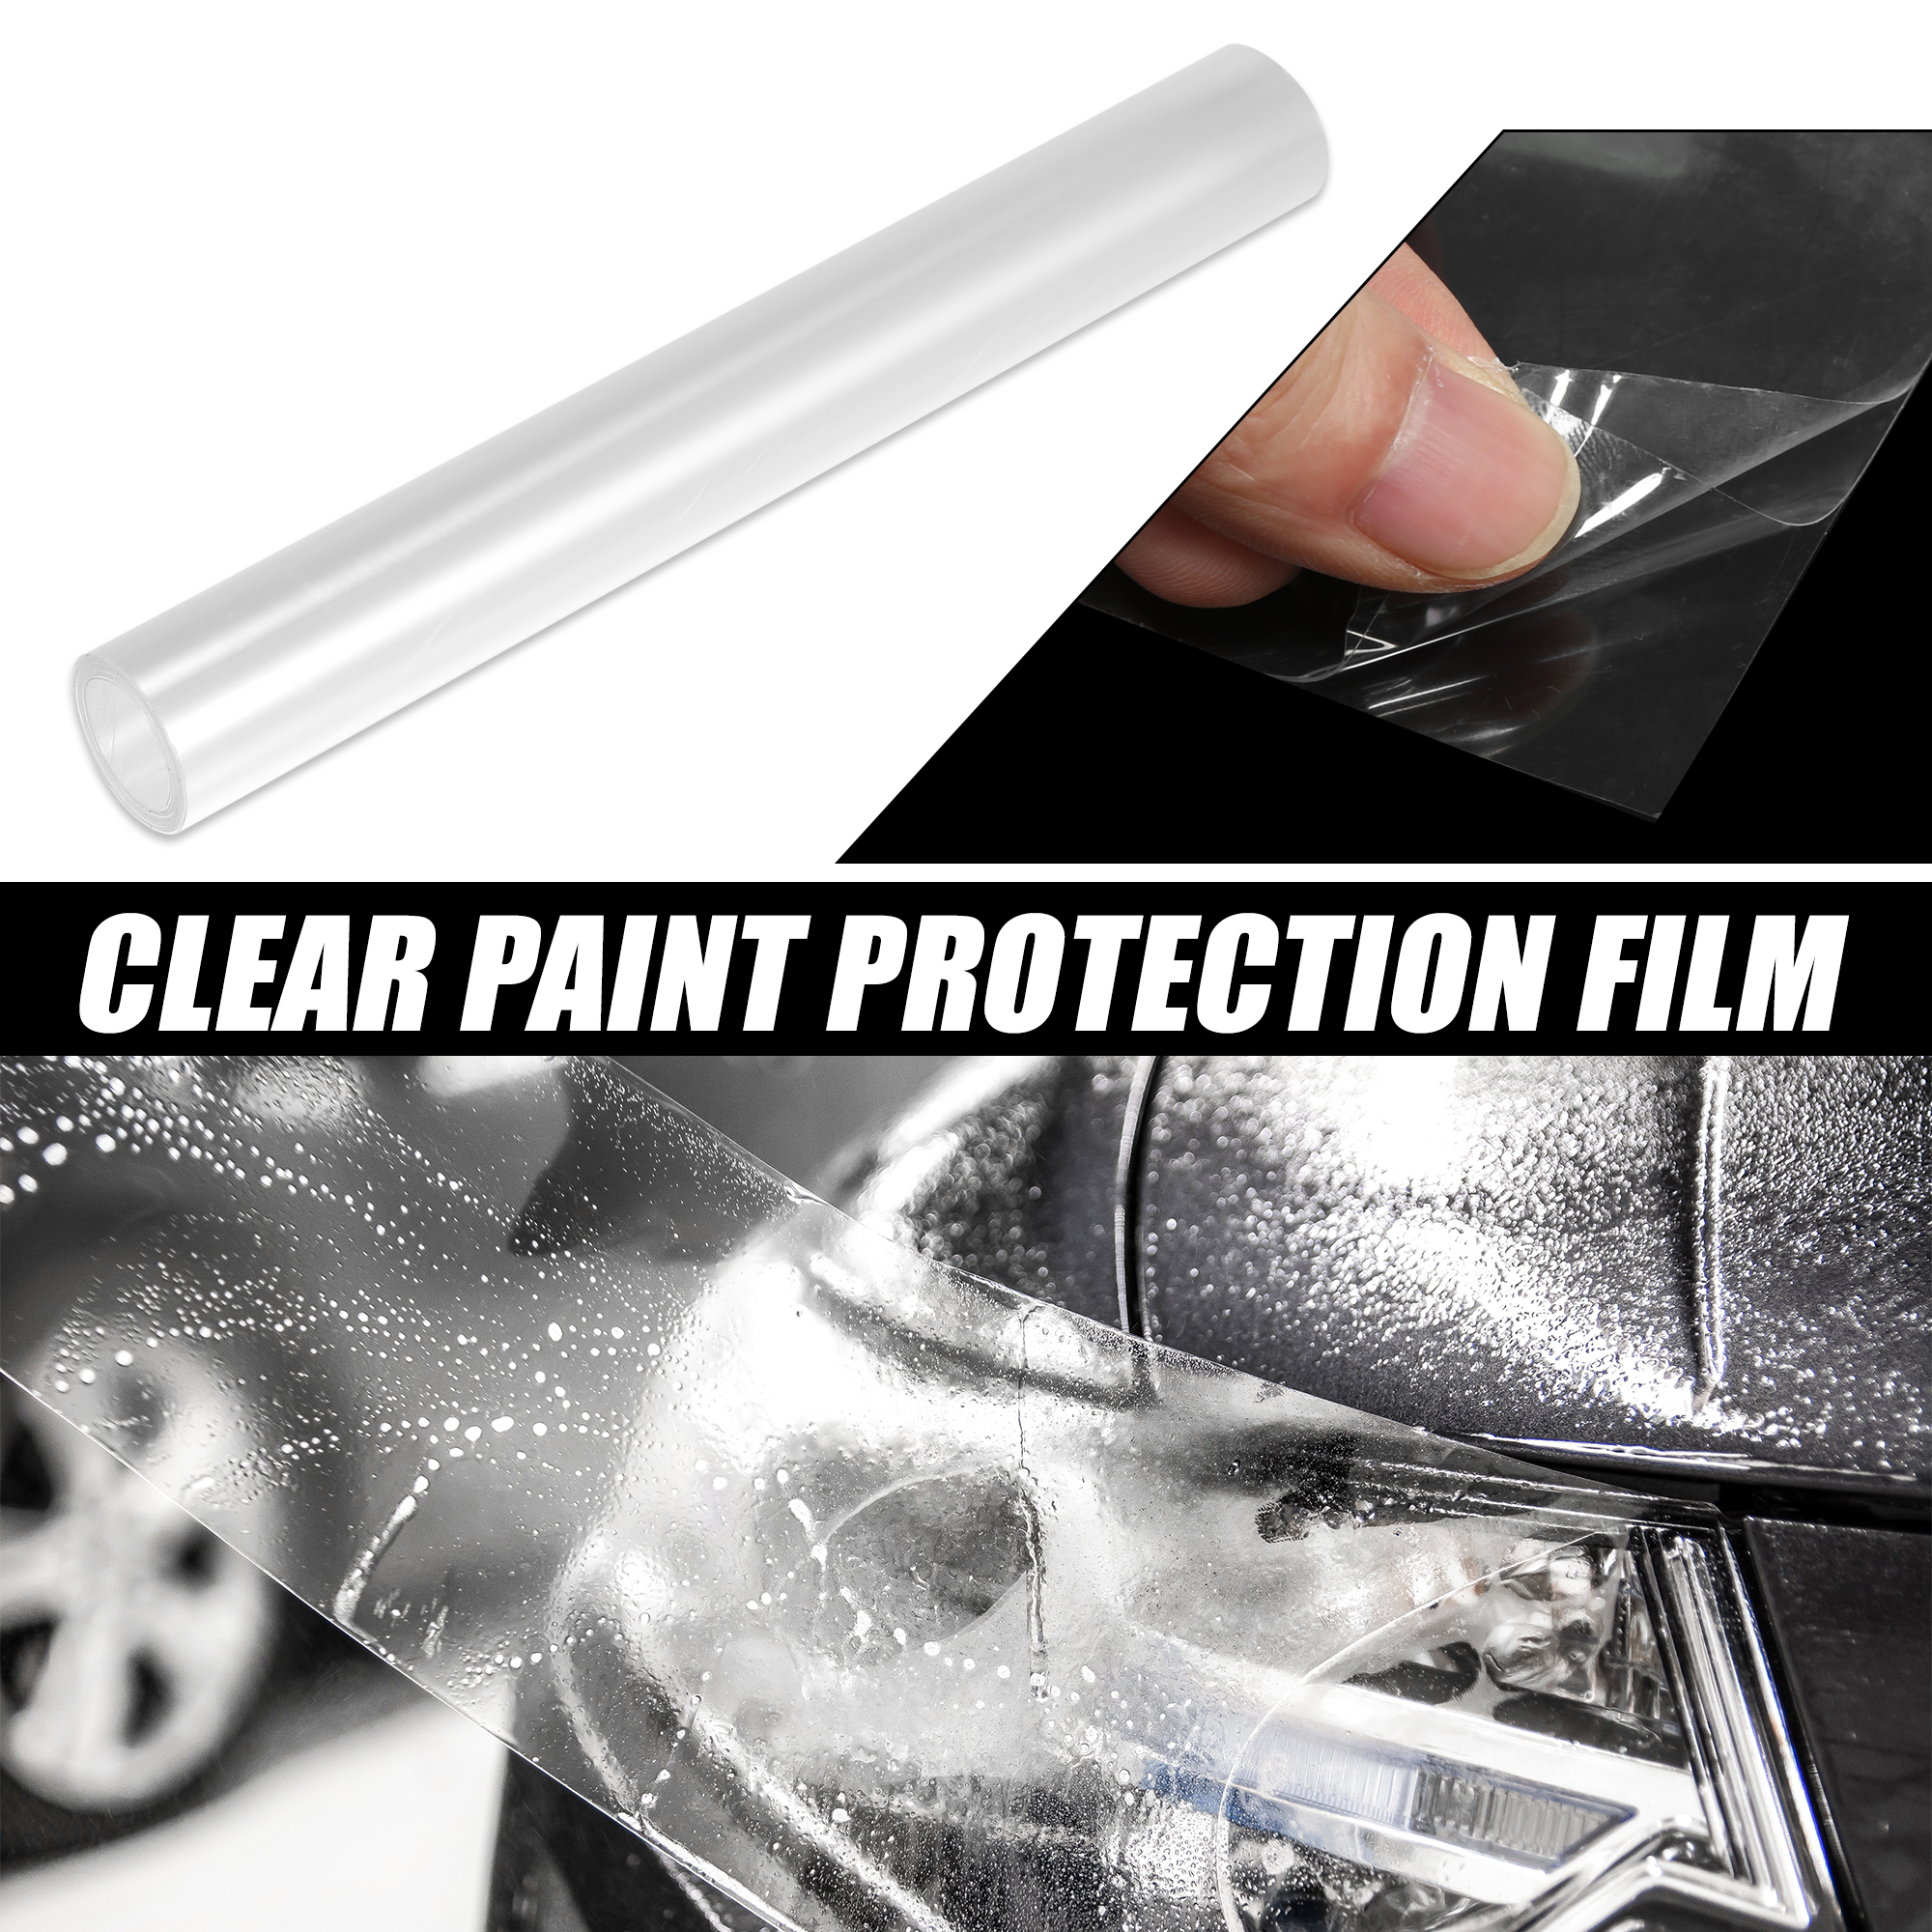 Clear Vinyl Car Paint Protection Film Cover Decal Scratch Resistant Self  Adhesive Sticker Universal 8